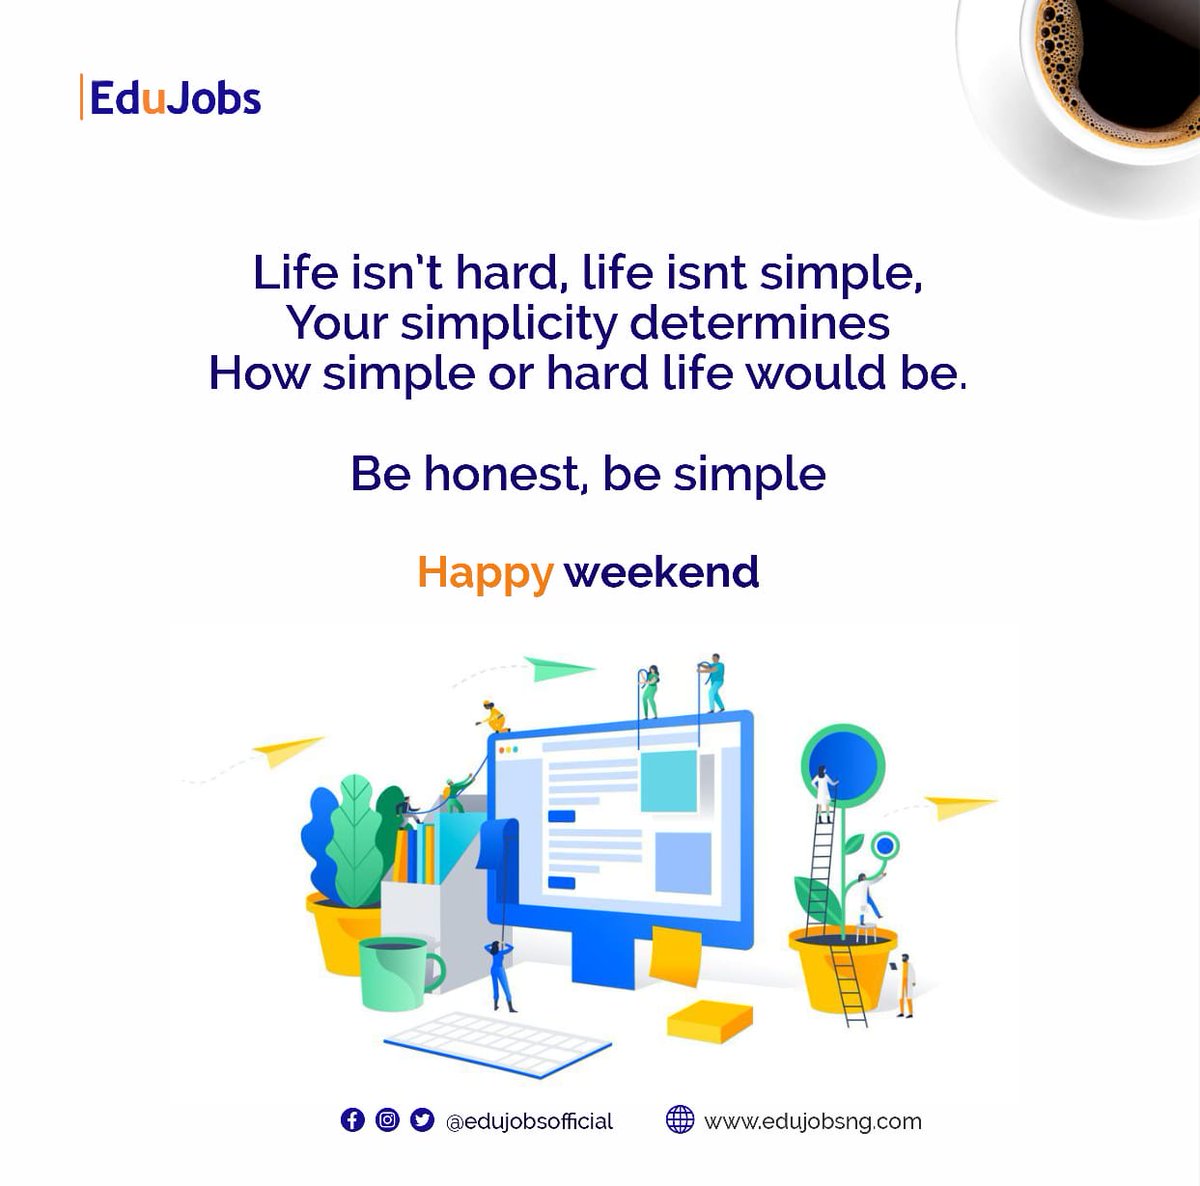 Life isn't hard, life isn't simple, your simplicity determines how simple or hard life would be.
Be honest, be simple!

Happy Weekend

 #mindset #edujobsofficial #edujobs #EdTech #career #learn #educational #teaching #weekend #simplicity #honest #simple